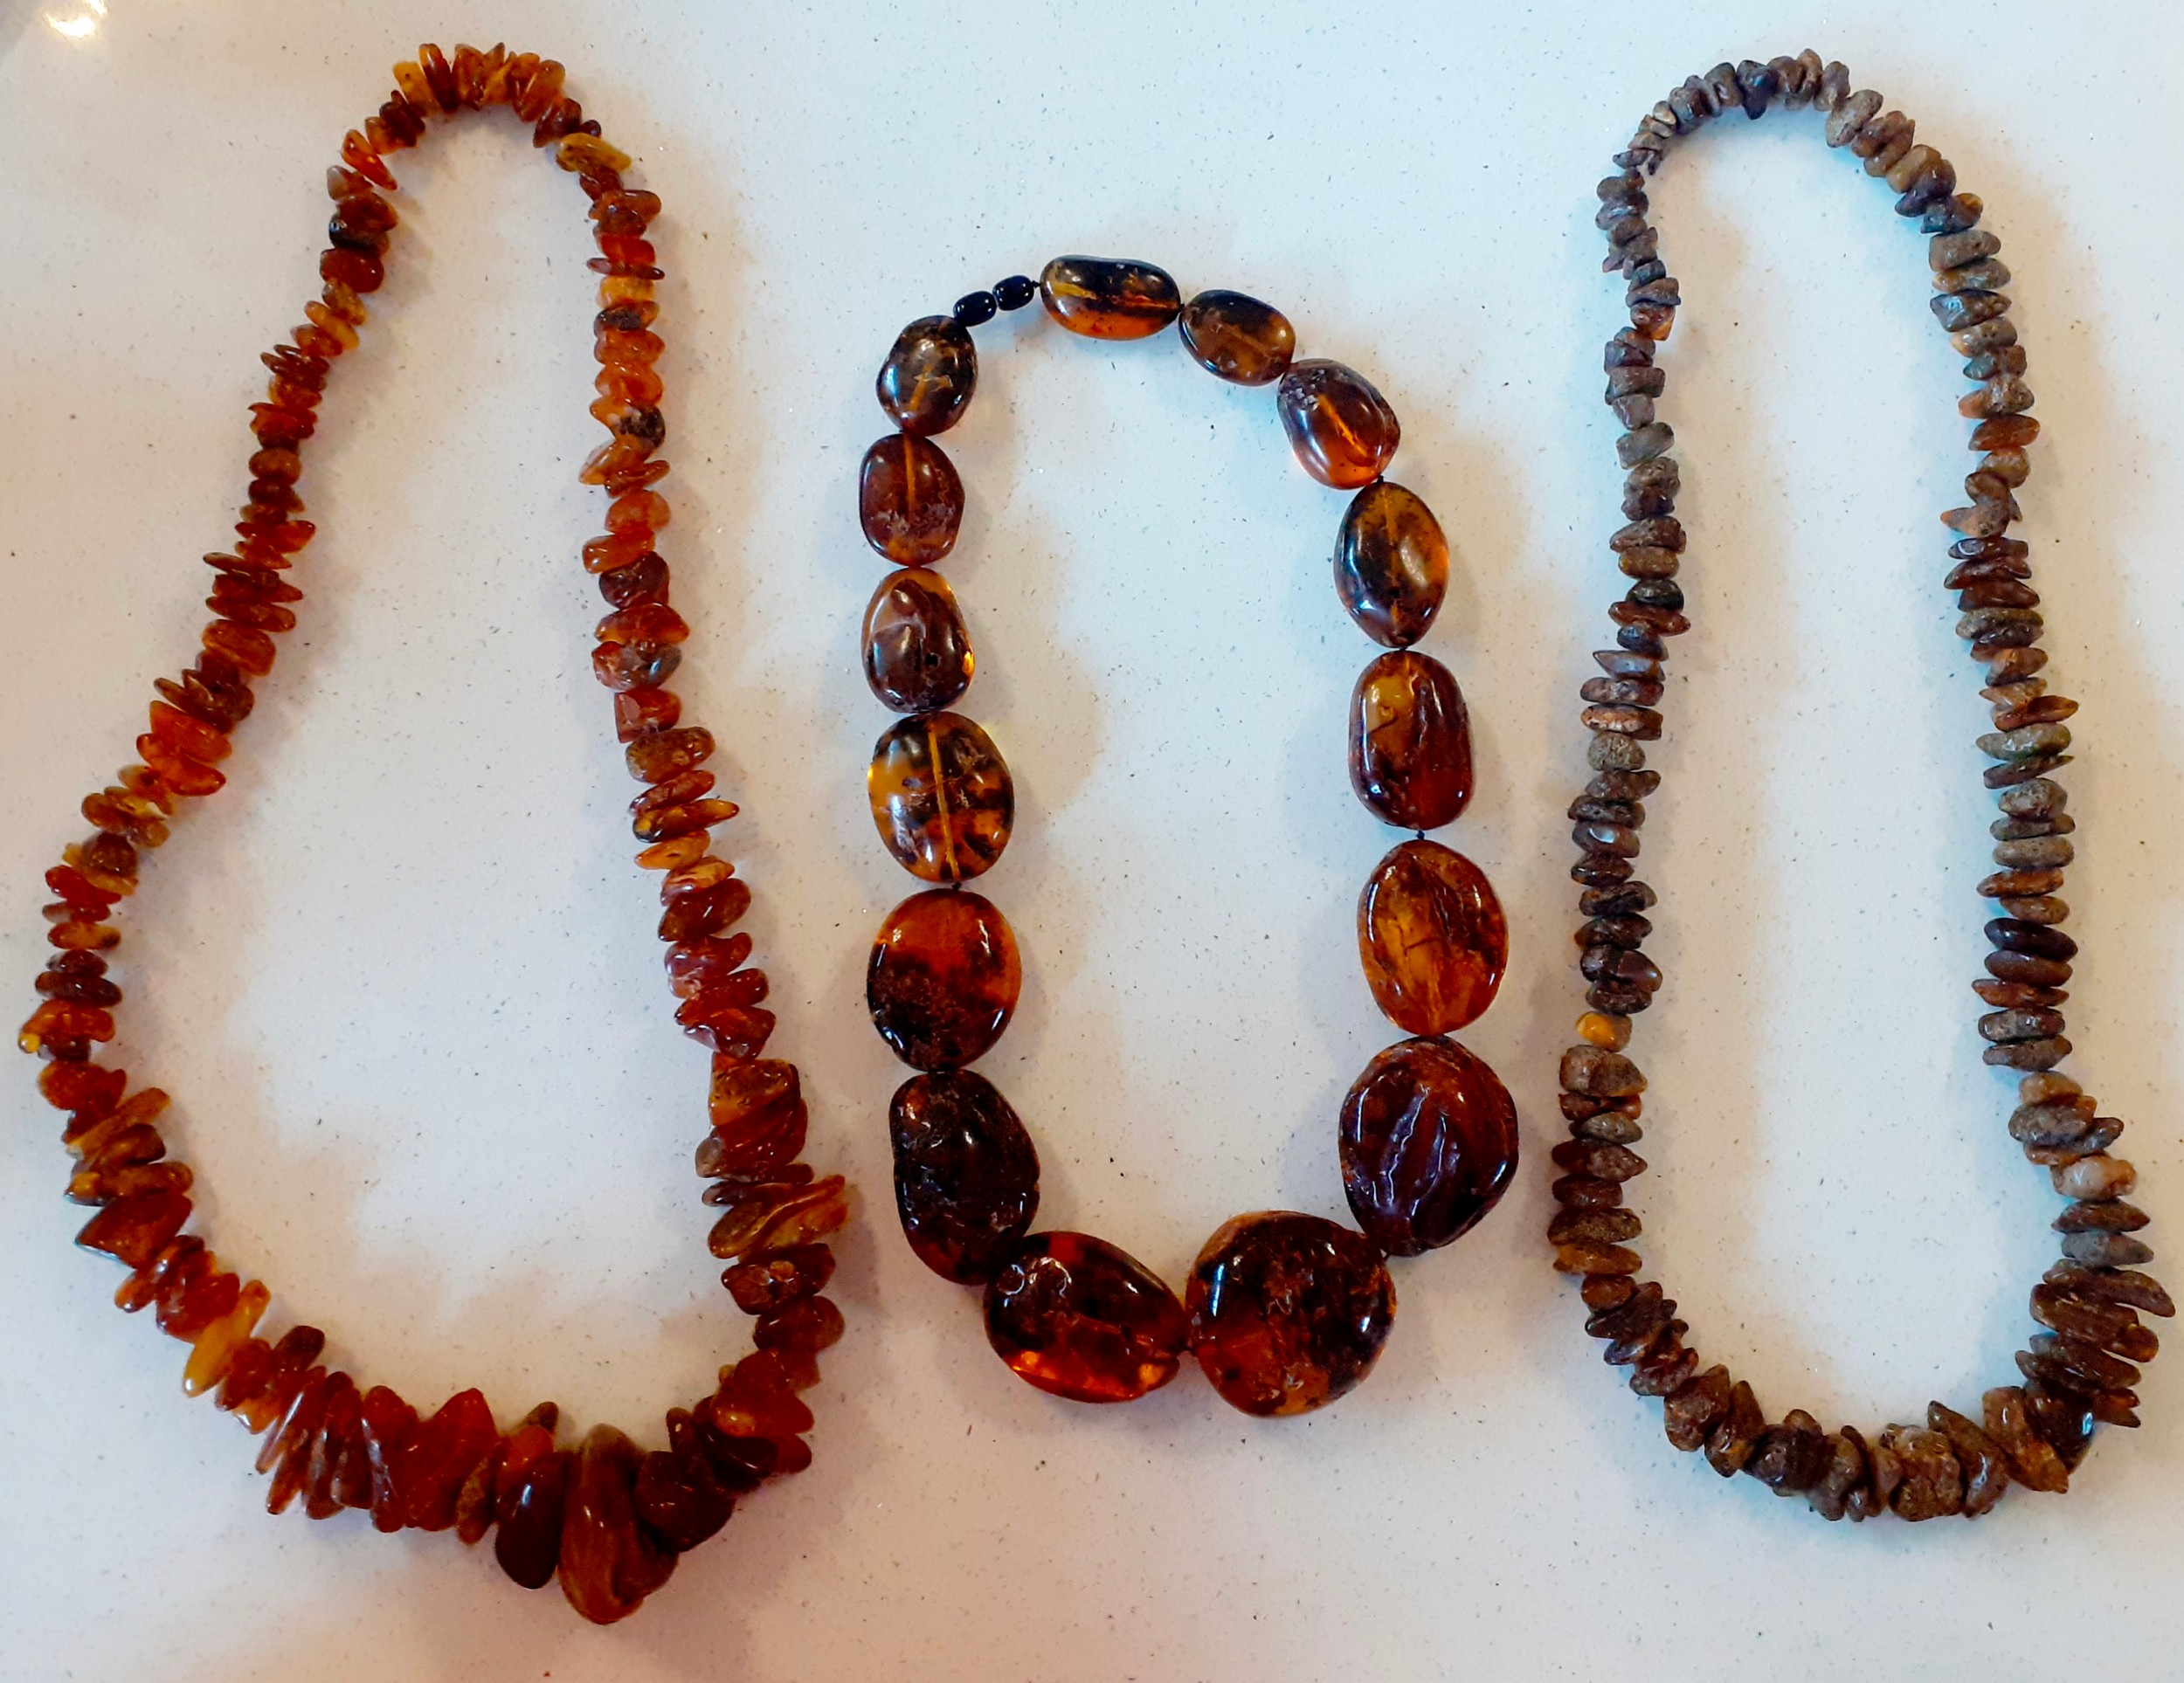 A vintage amber necklace having 15 beads of various sizes and shapes together with 2 vintage rough-